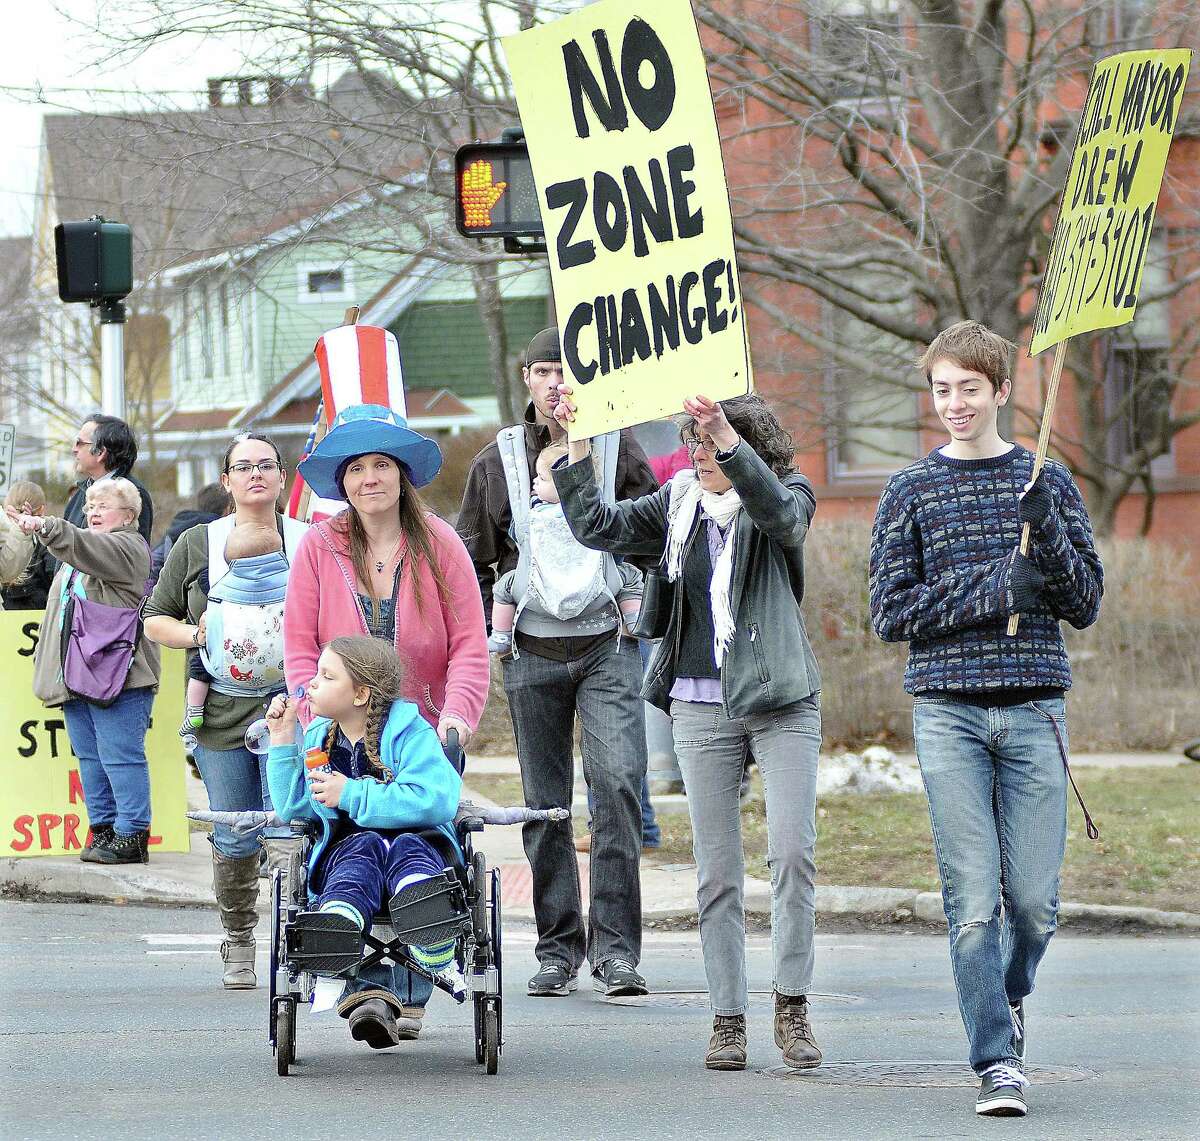 Approximately 40 Middletown residents protested carrying signs at the cross walk in this 2013 file photo at the intersection of Washington and High Streets in response to developer Robert Landino’s proposal to change zoning for a portion of Washington Street in Middletown.